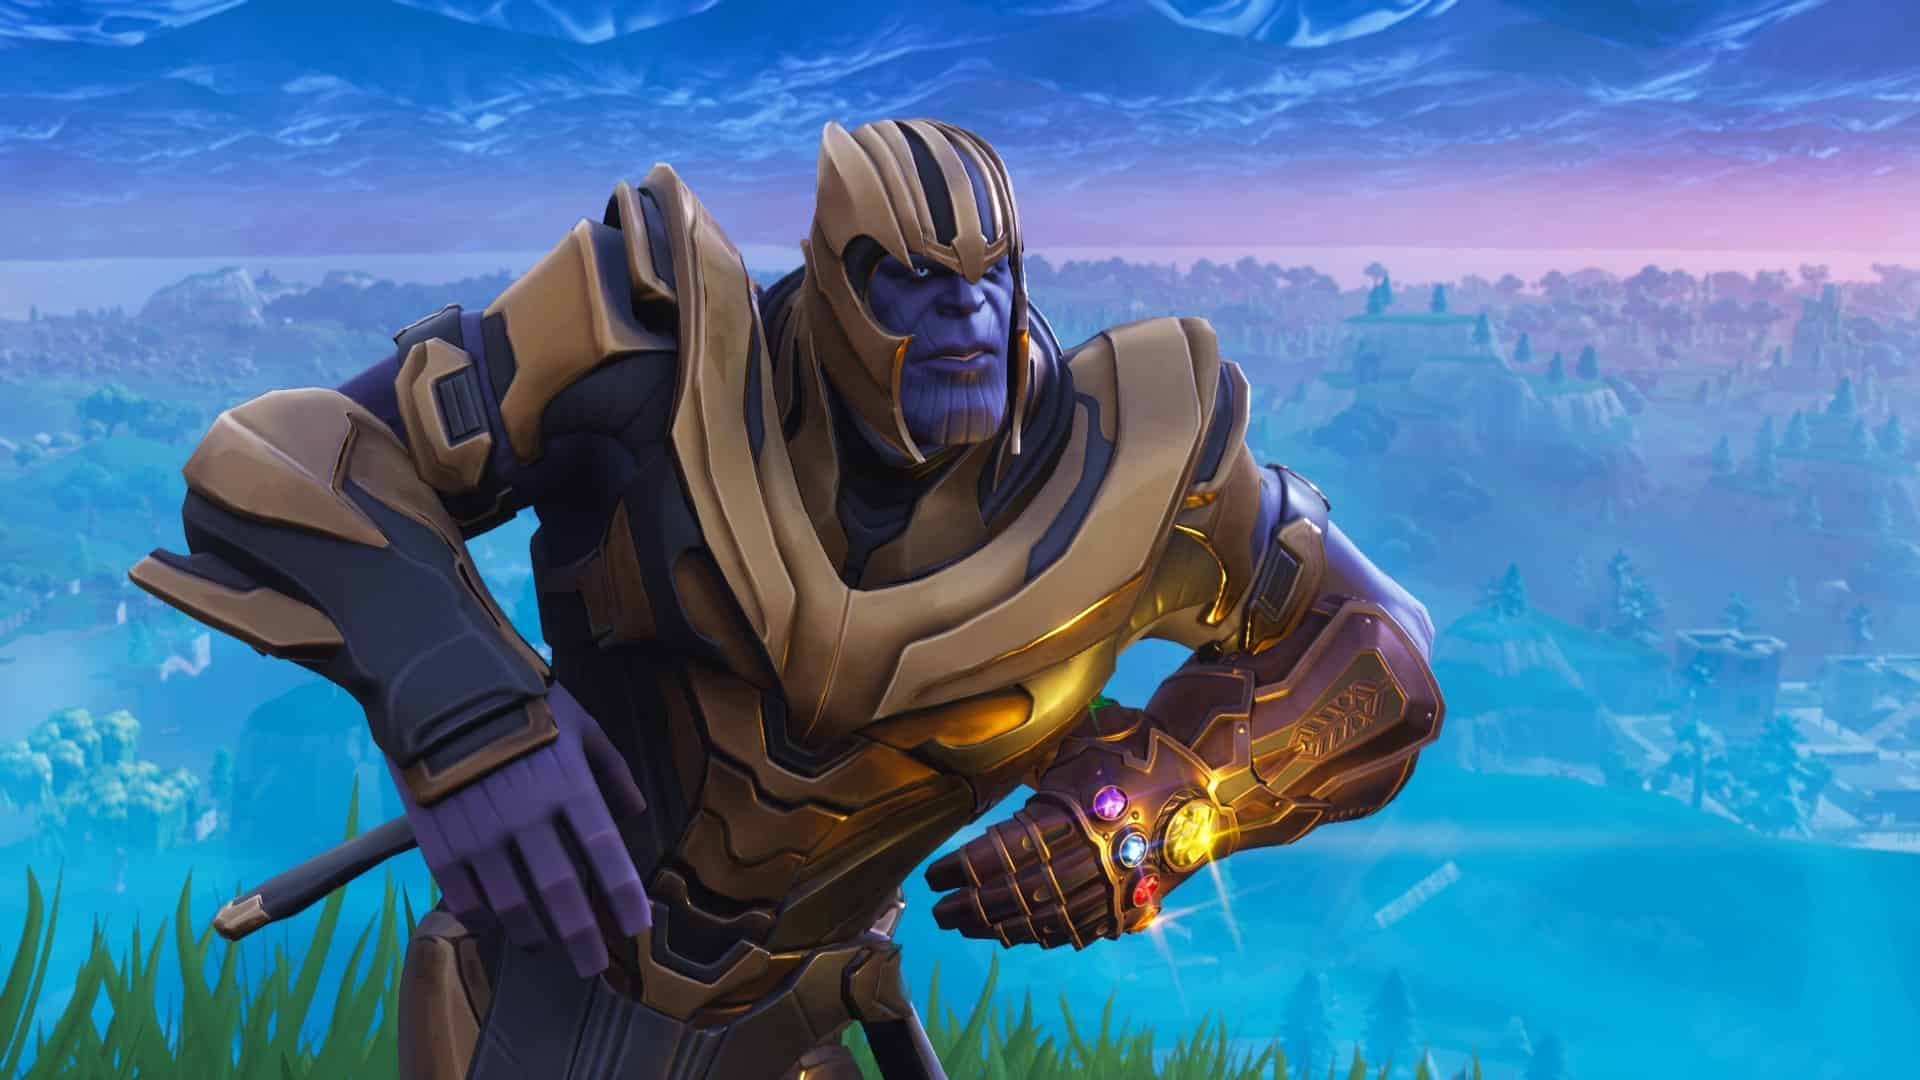 Fortnite Thanos Gets Tweaked Again, More Power but Less Health